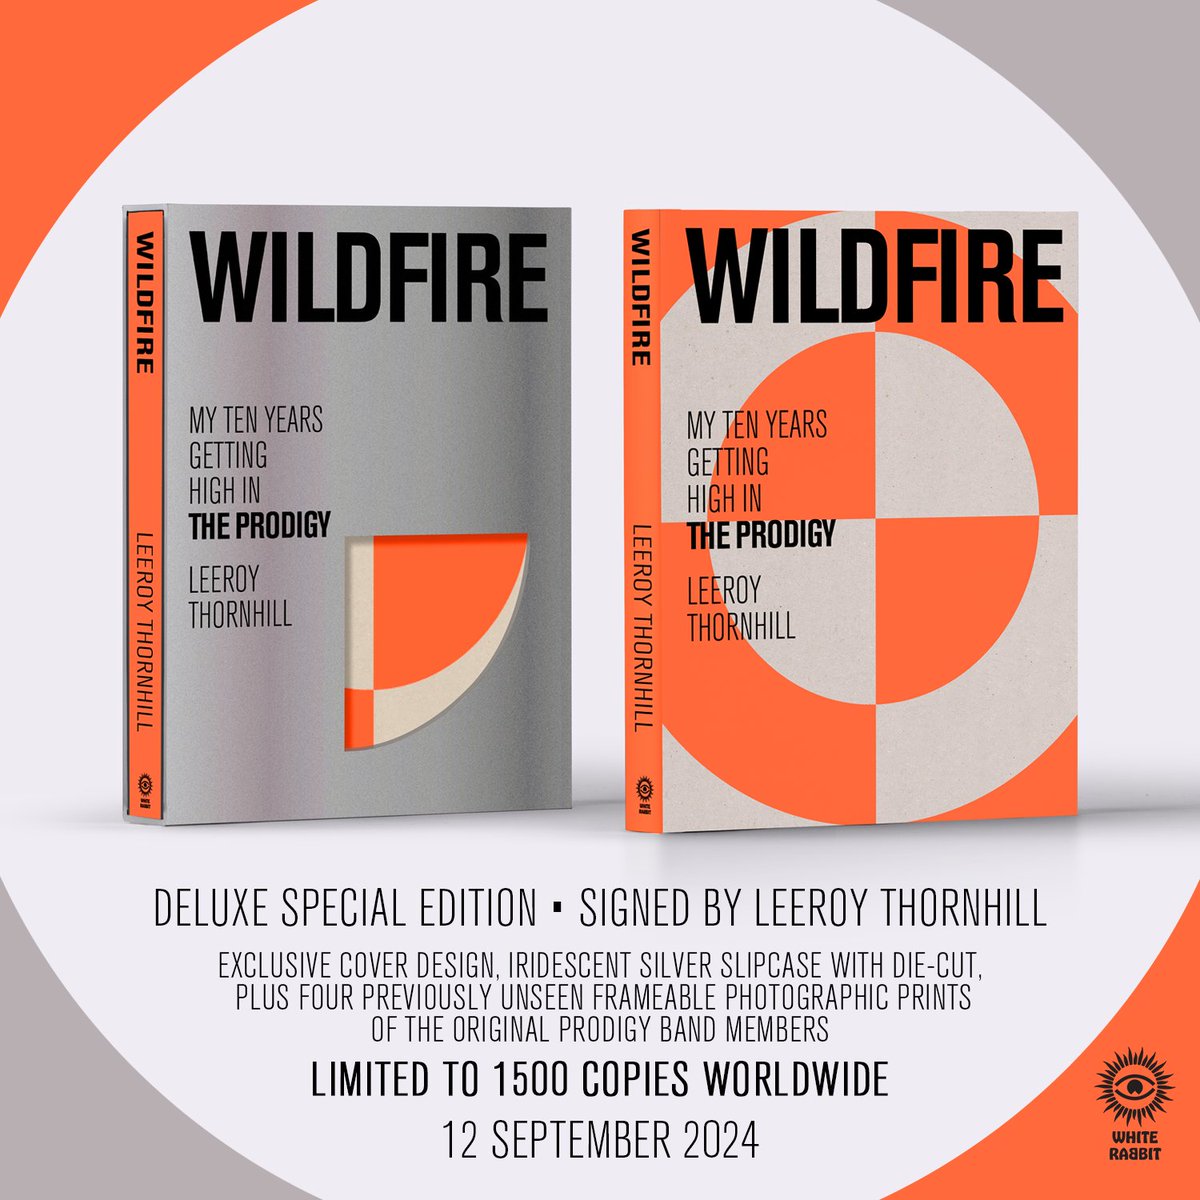 PREORDER: bit.ly/3Uojwrb Leeroy Thornhill - Wildfire: My Ten Years Getting High in the Prodigy Deluxe Slipcase Edition version strictly limited to 1500 copies worldwide, SIGNED by the author with exclusive artwork and 4 unseen photographic prints. via @WhiteRabbitBks